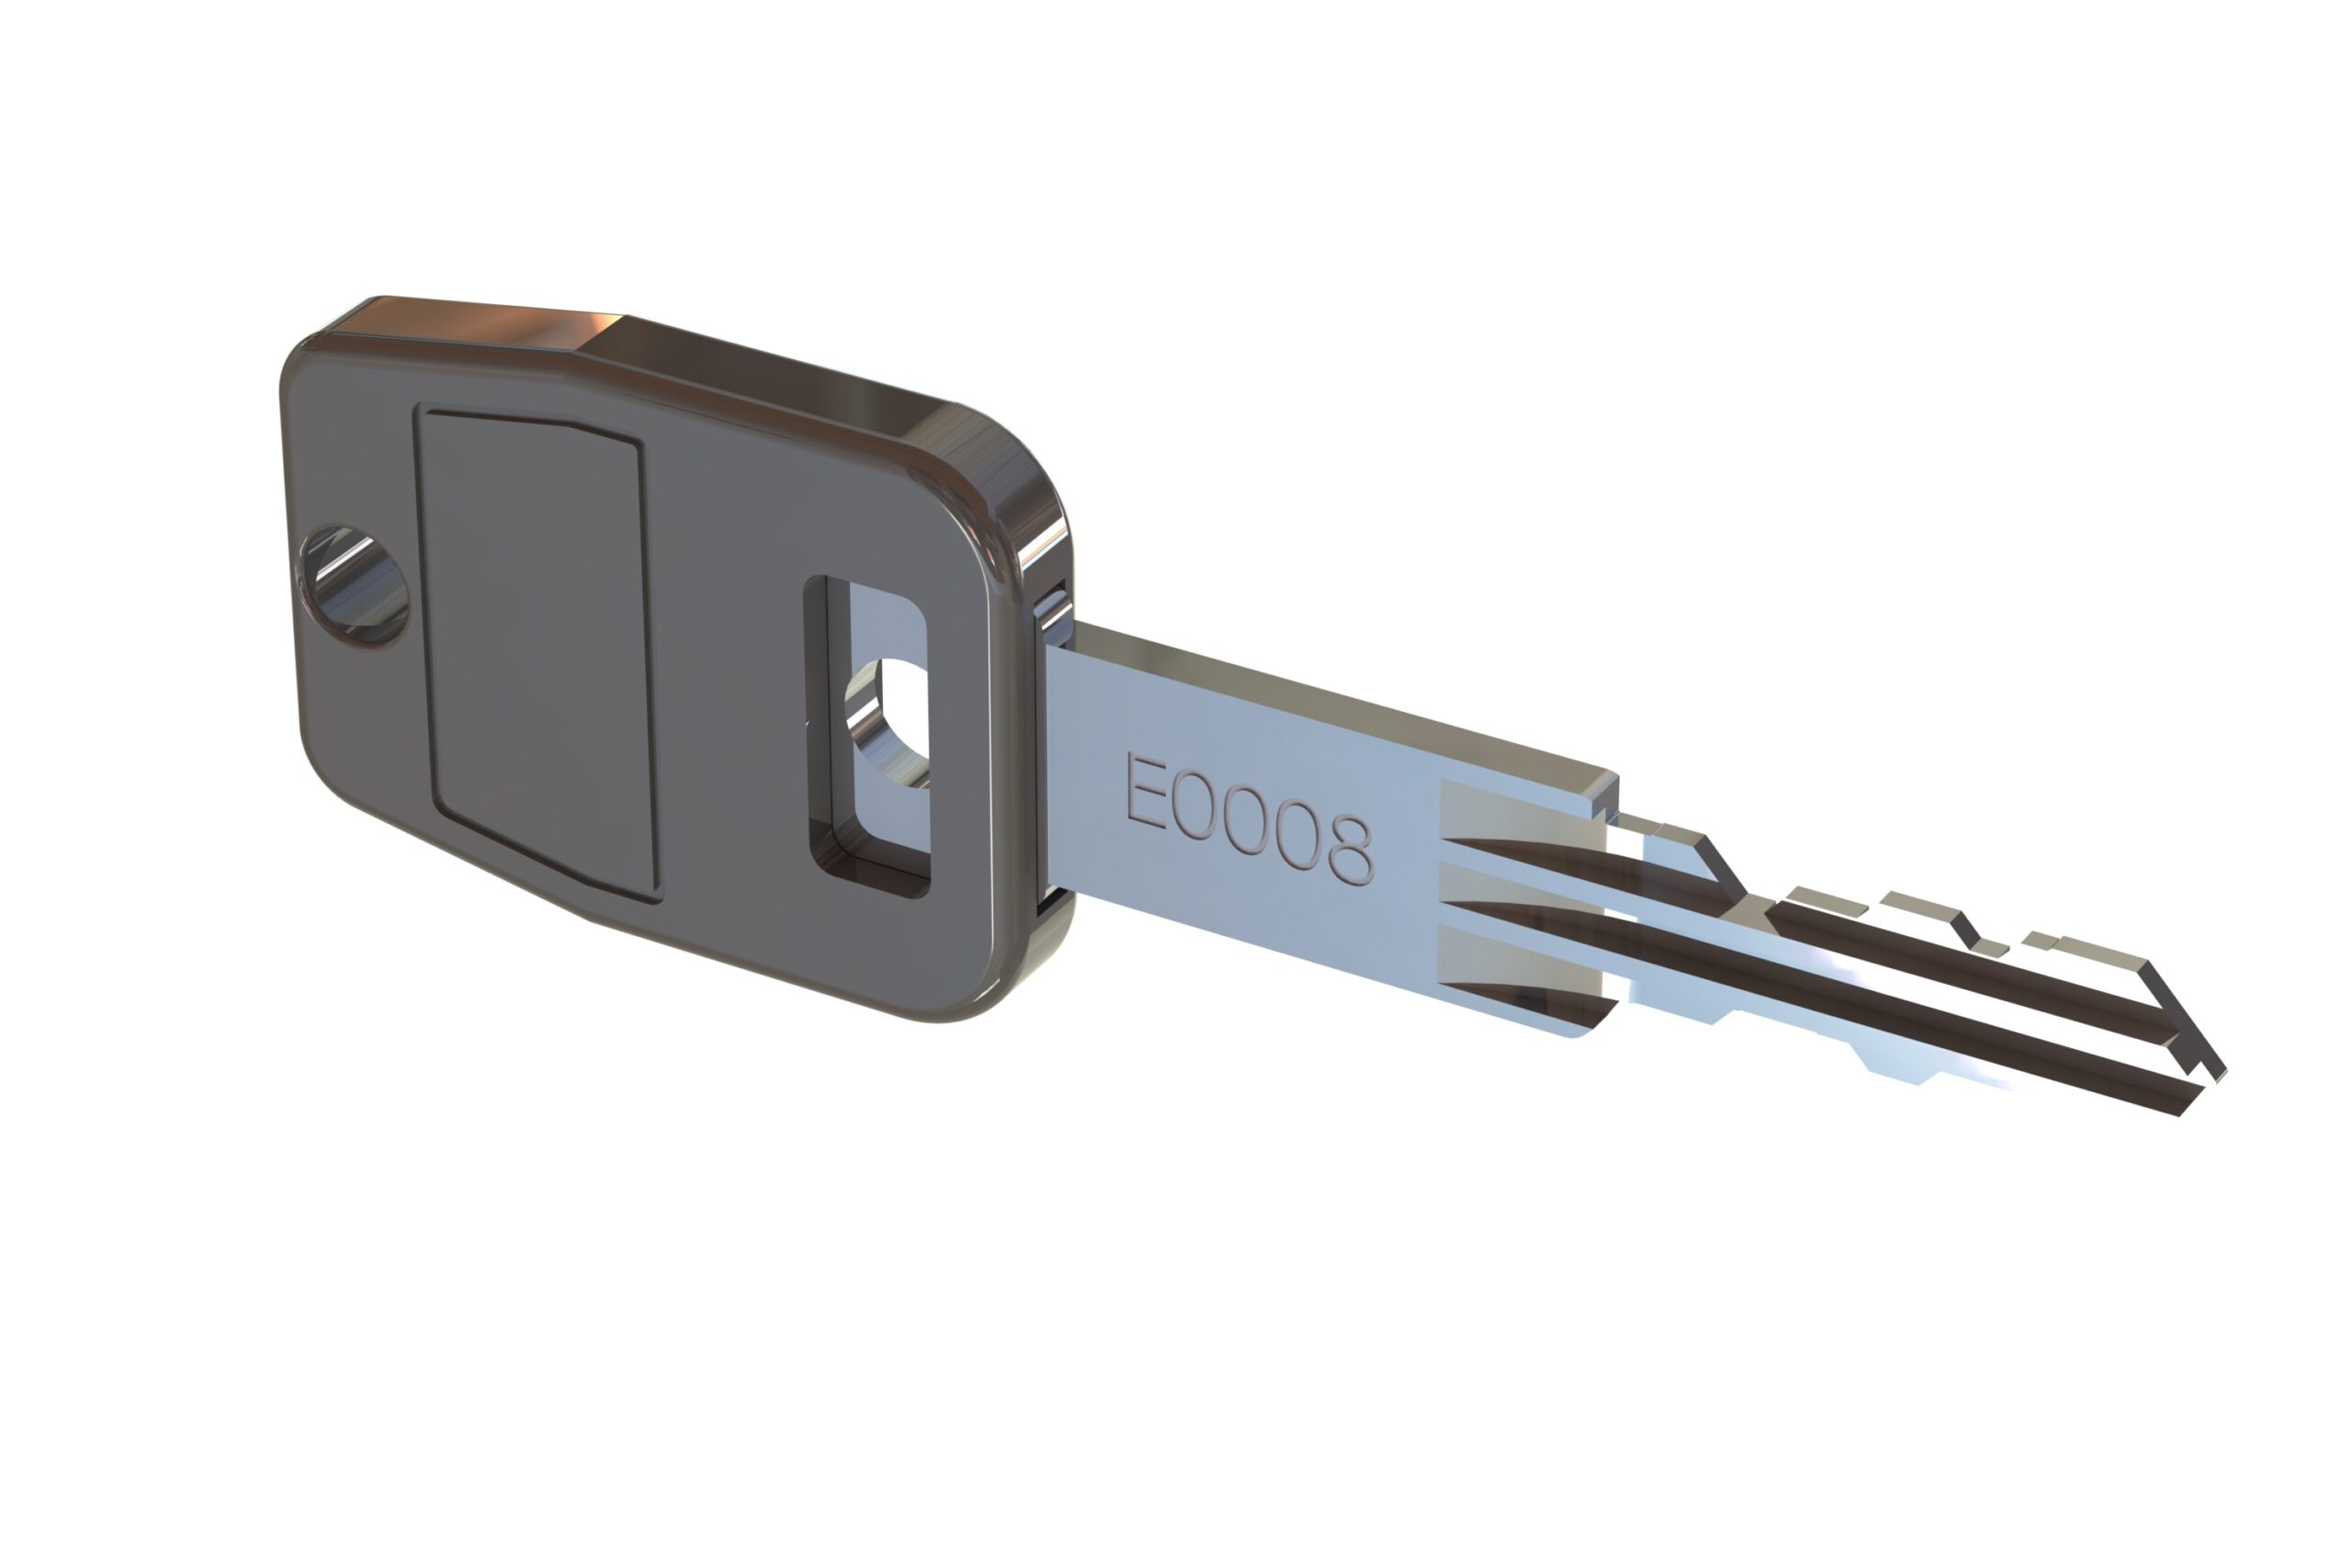 Extra extended override key_3792 electronic latchlock